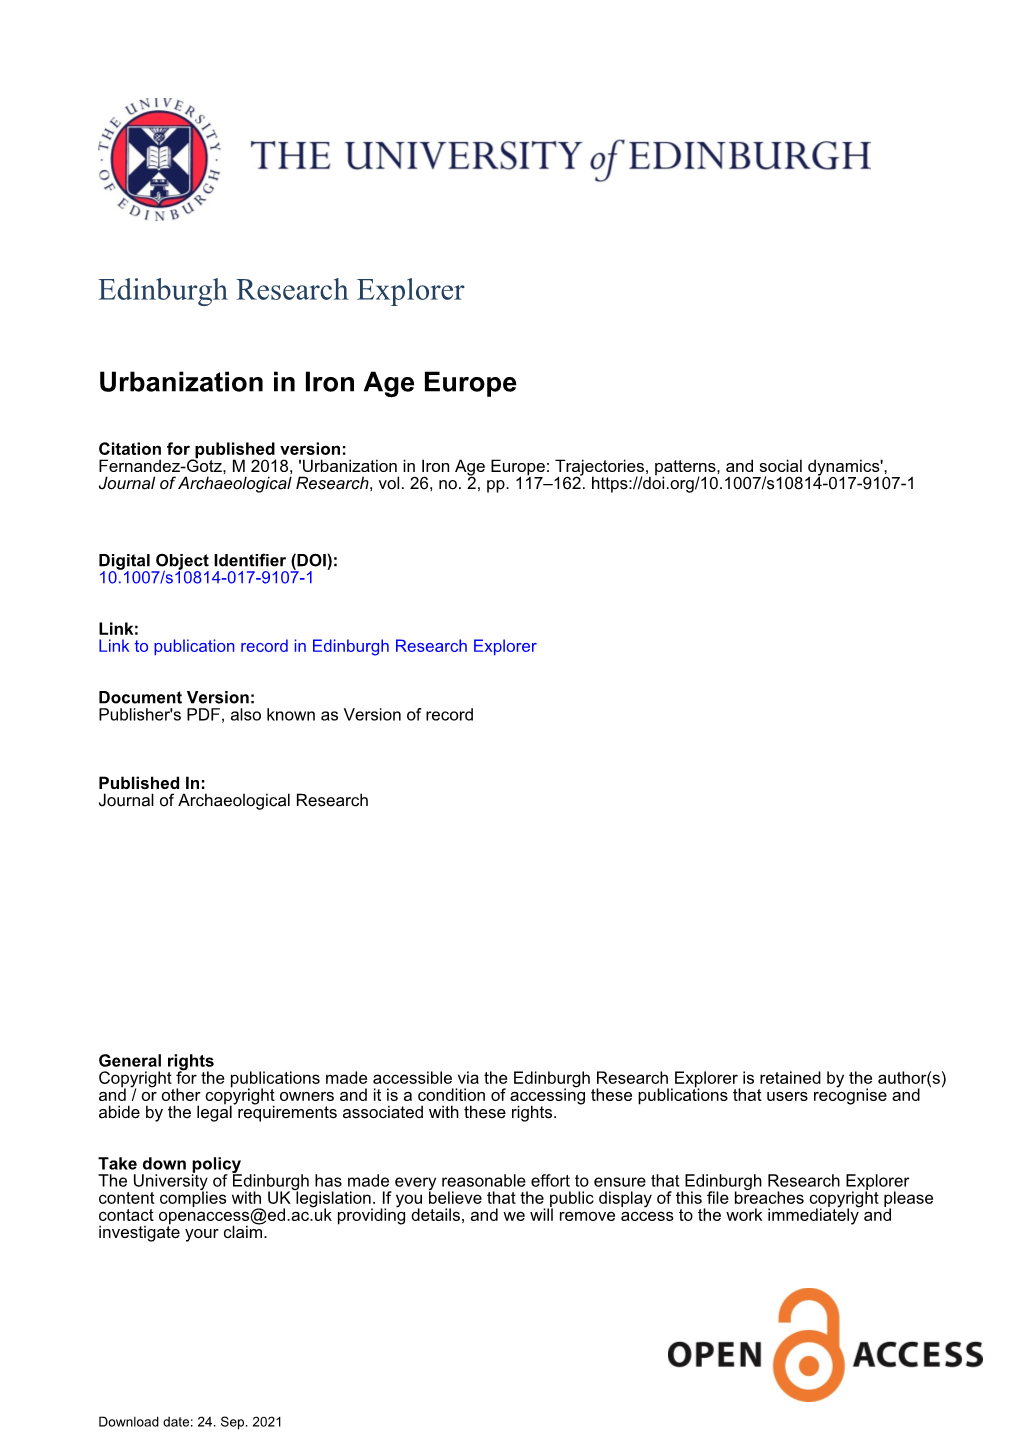 Urbanization in Iron Age Europe: Trajectories, Patterns, and Social Dynamics', Journal of Archaeological Research, Vol